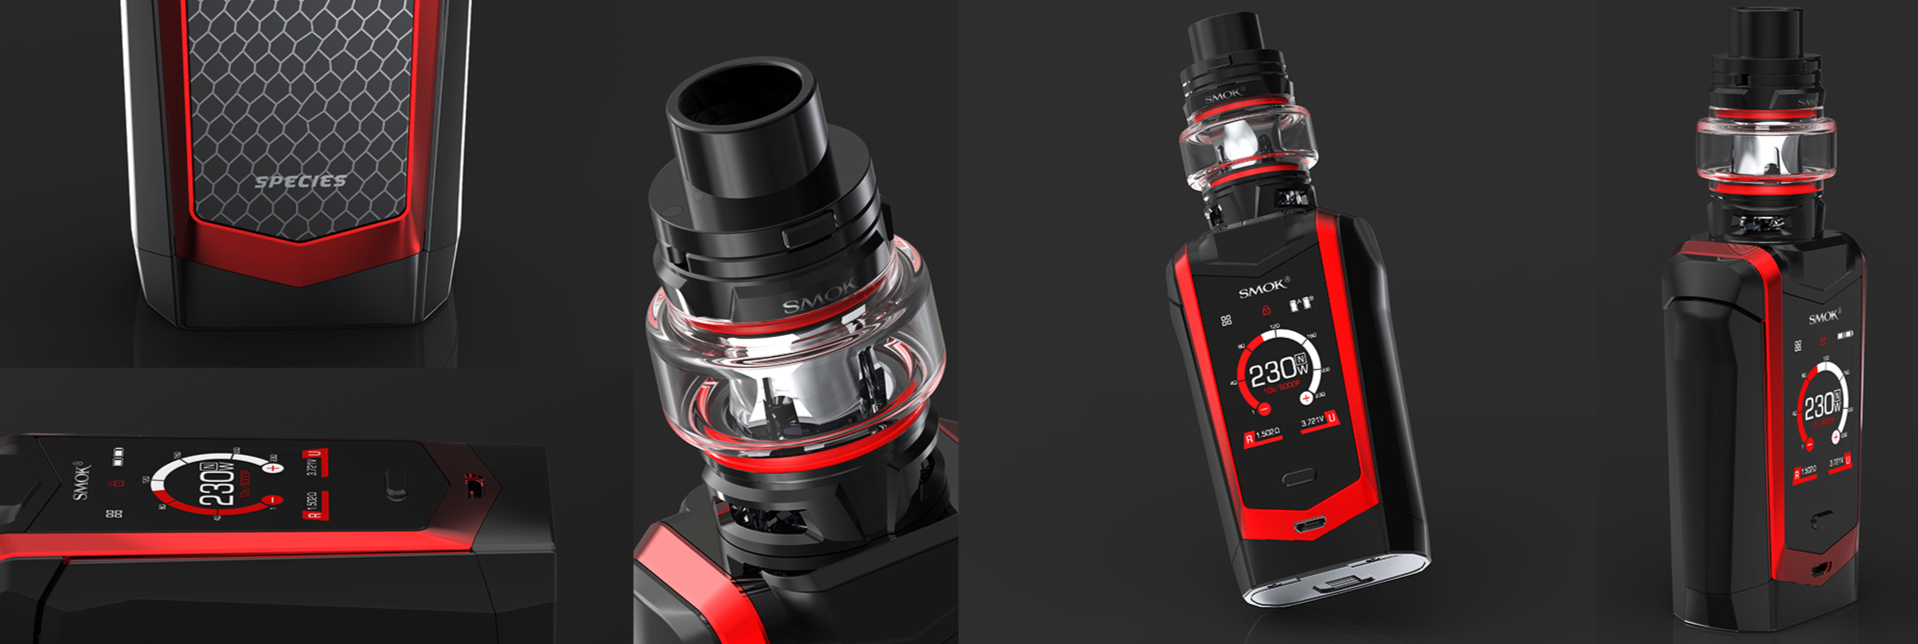 The Views of SMOK Species Kit from Different Angles